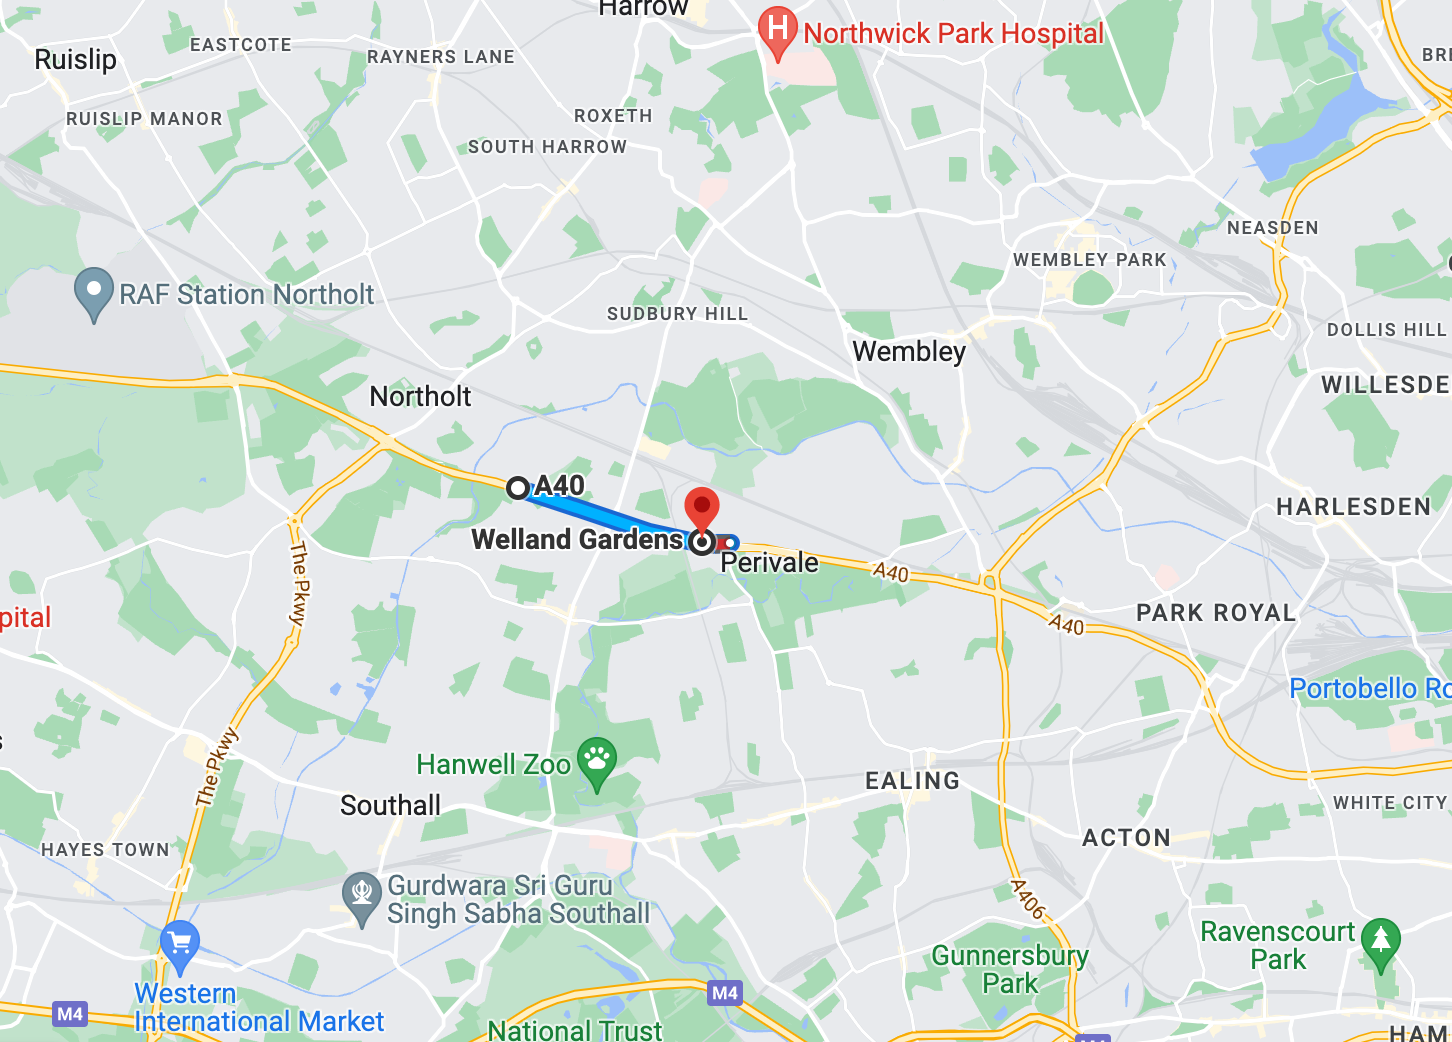 A stretch along the A40 between Long Drive and Welland Gardens, northwest London, has been identified as having the most prolific speed cameras